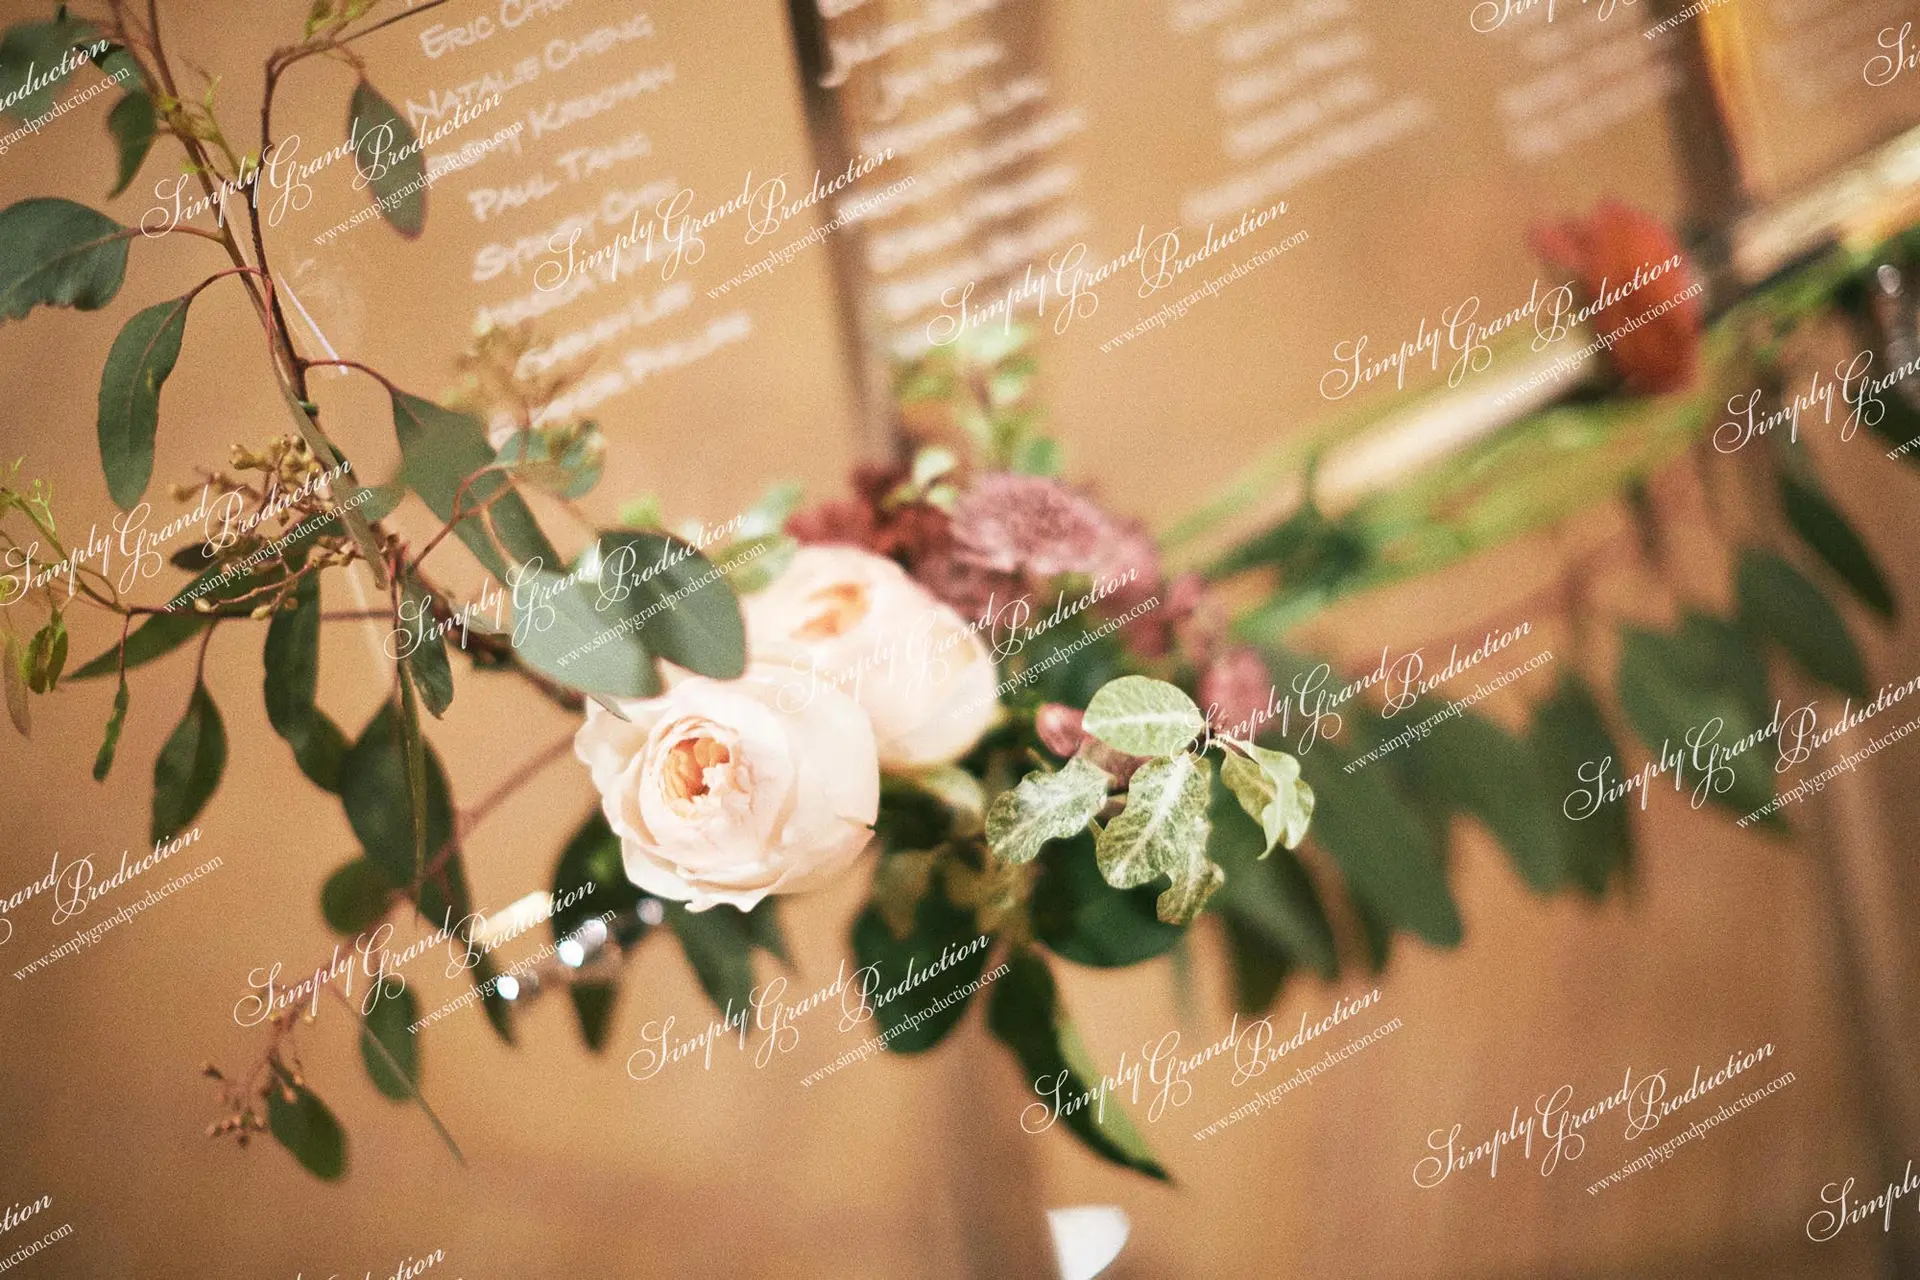 Simply_Grand_Production_Ballroom_wedding_decoration_reception_guest_list_seating_chart_garden_rose_green_leave_1_5_wm